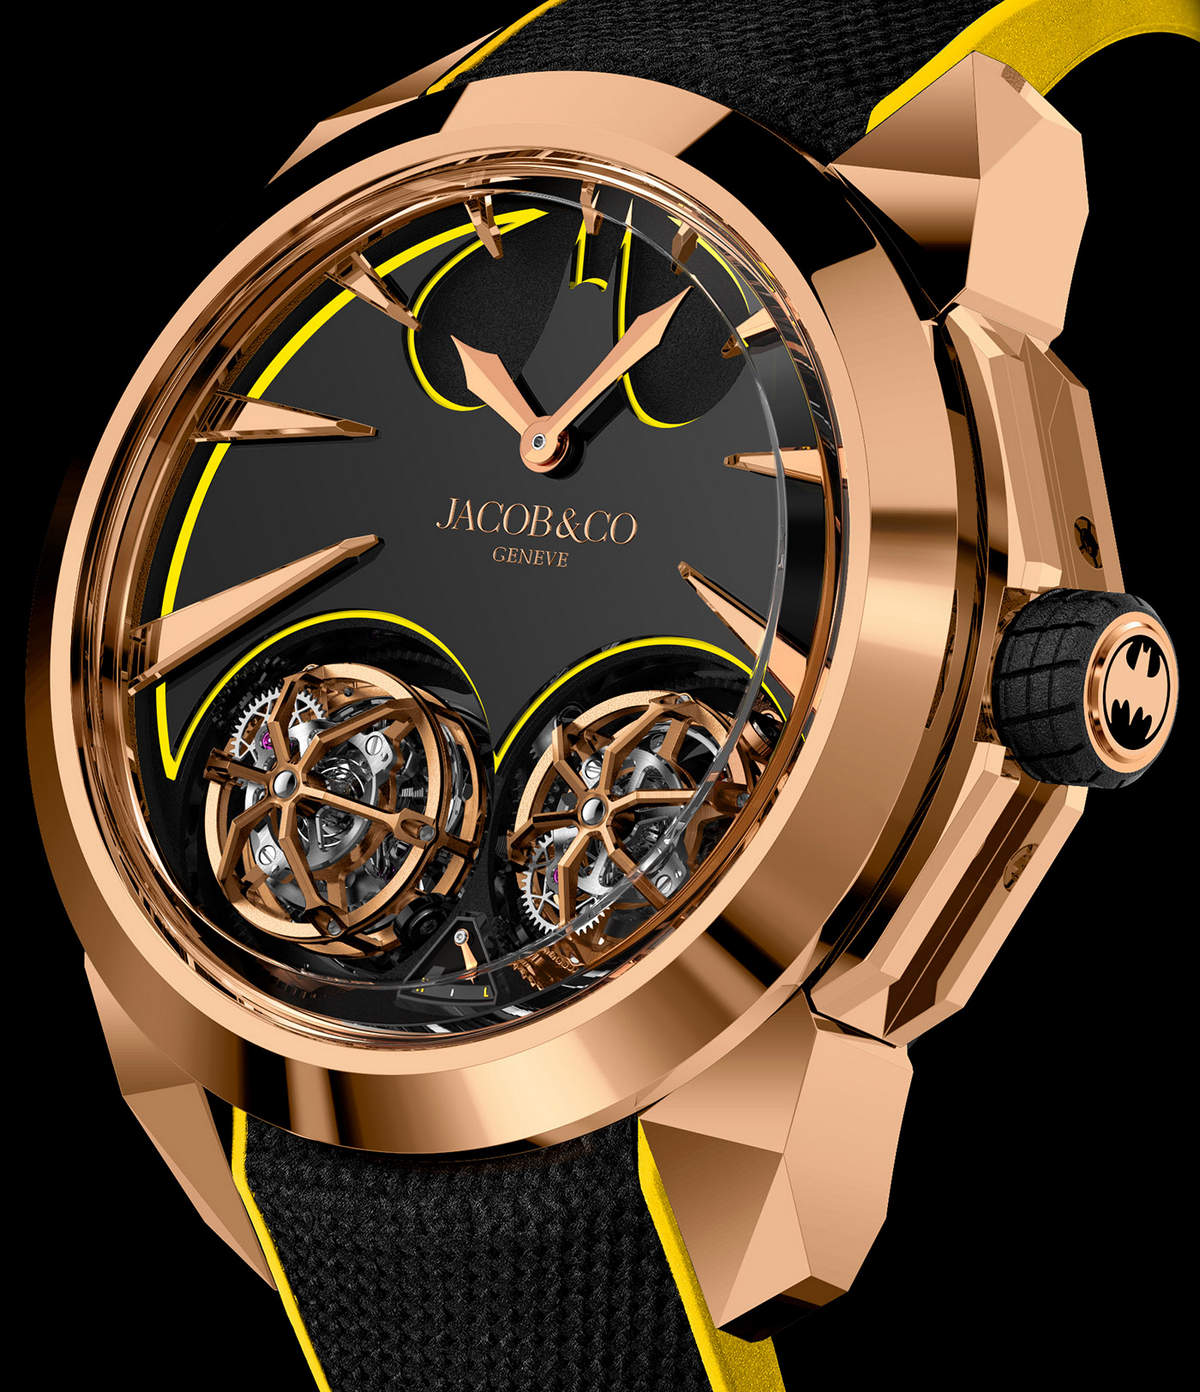 This $380,000 Jacob & Co watch has an on demand oil pumping animation on  the dial - Luxurylaunches